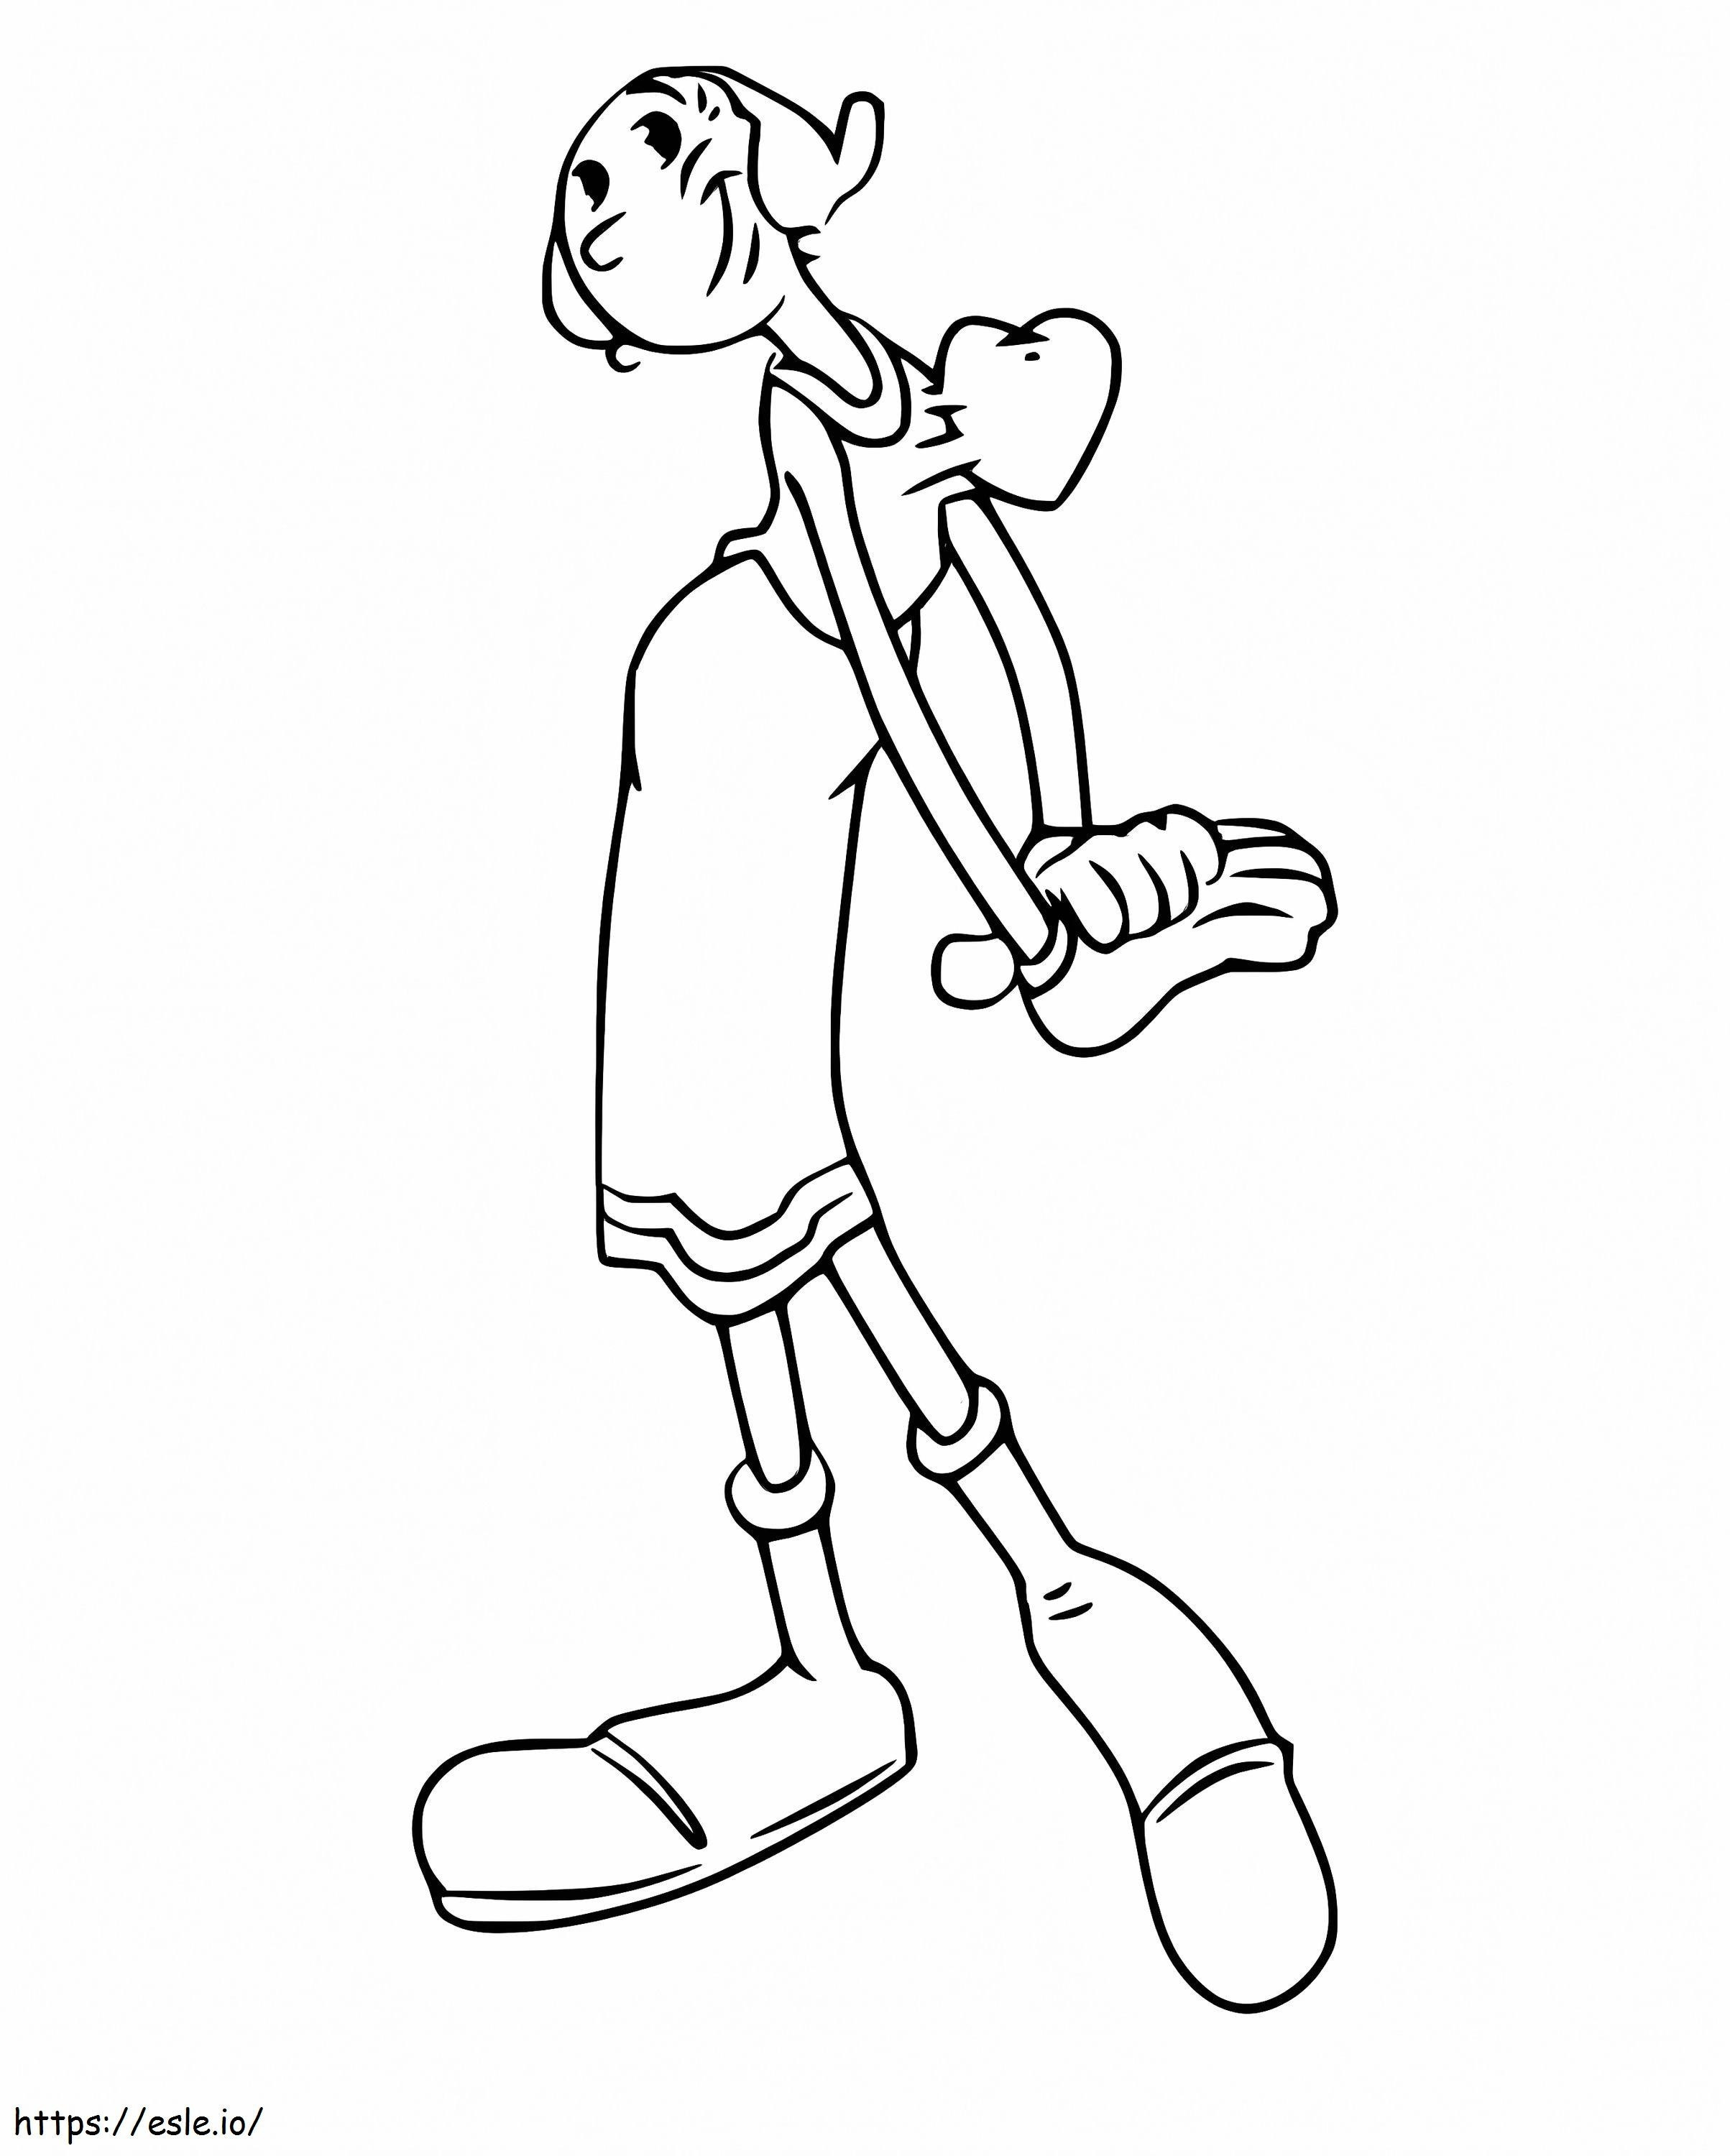 Popeye Olive Oil coloring page